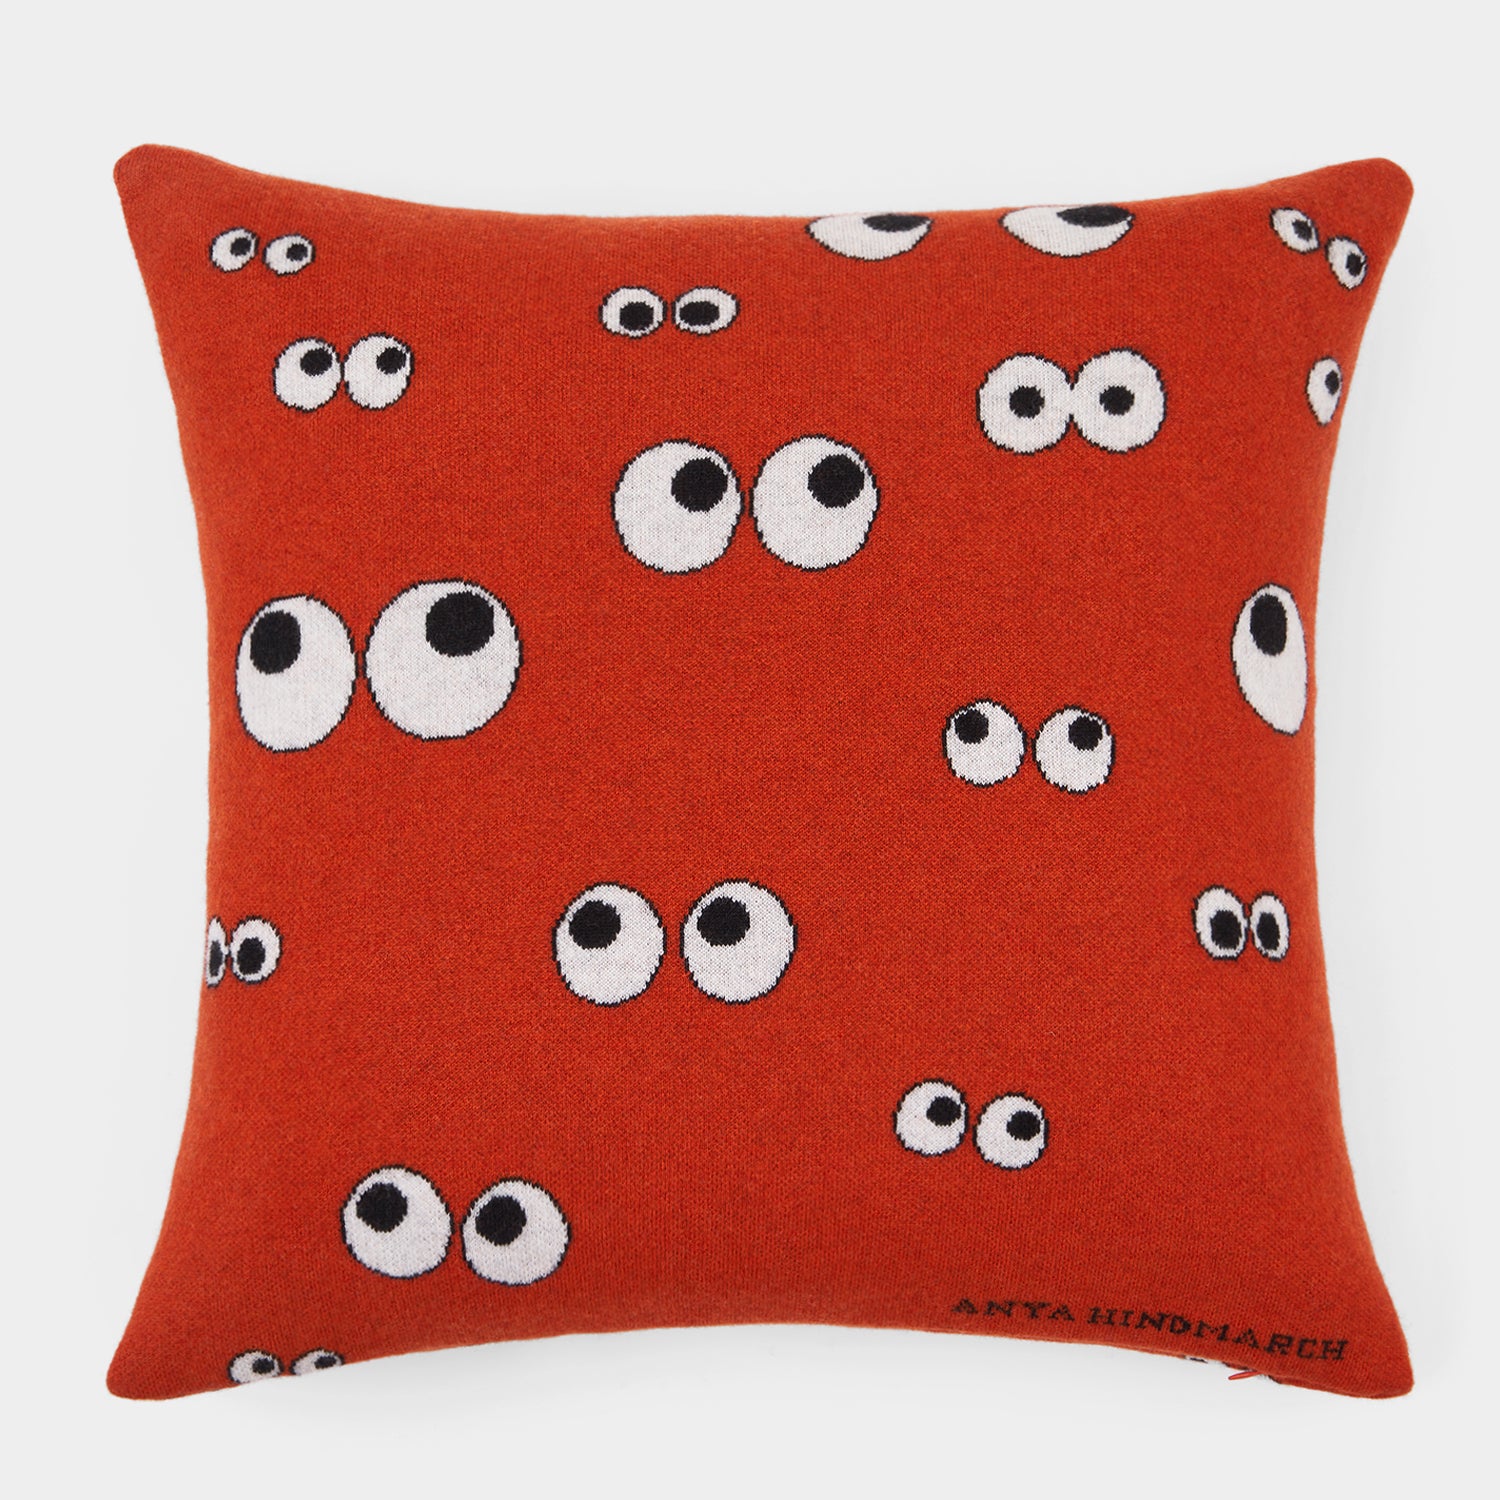 All Over Eyes Cushion -

                  
                    Lambswool in Dark Clementine -
                  

                  Anya Hindmarch UK
